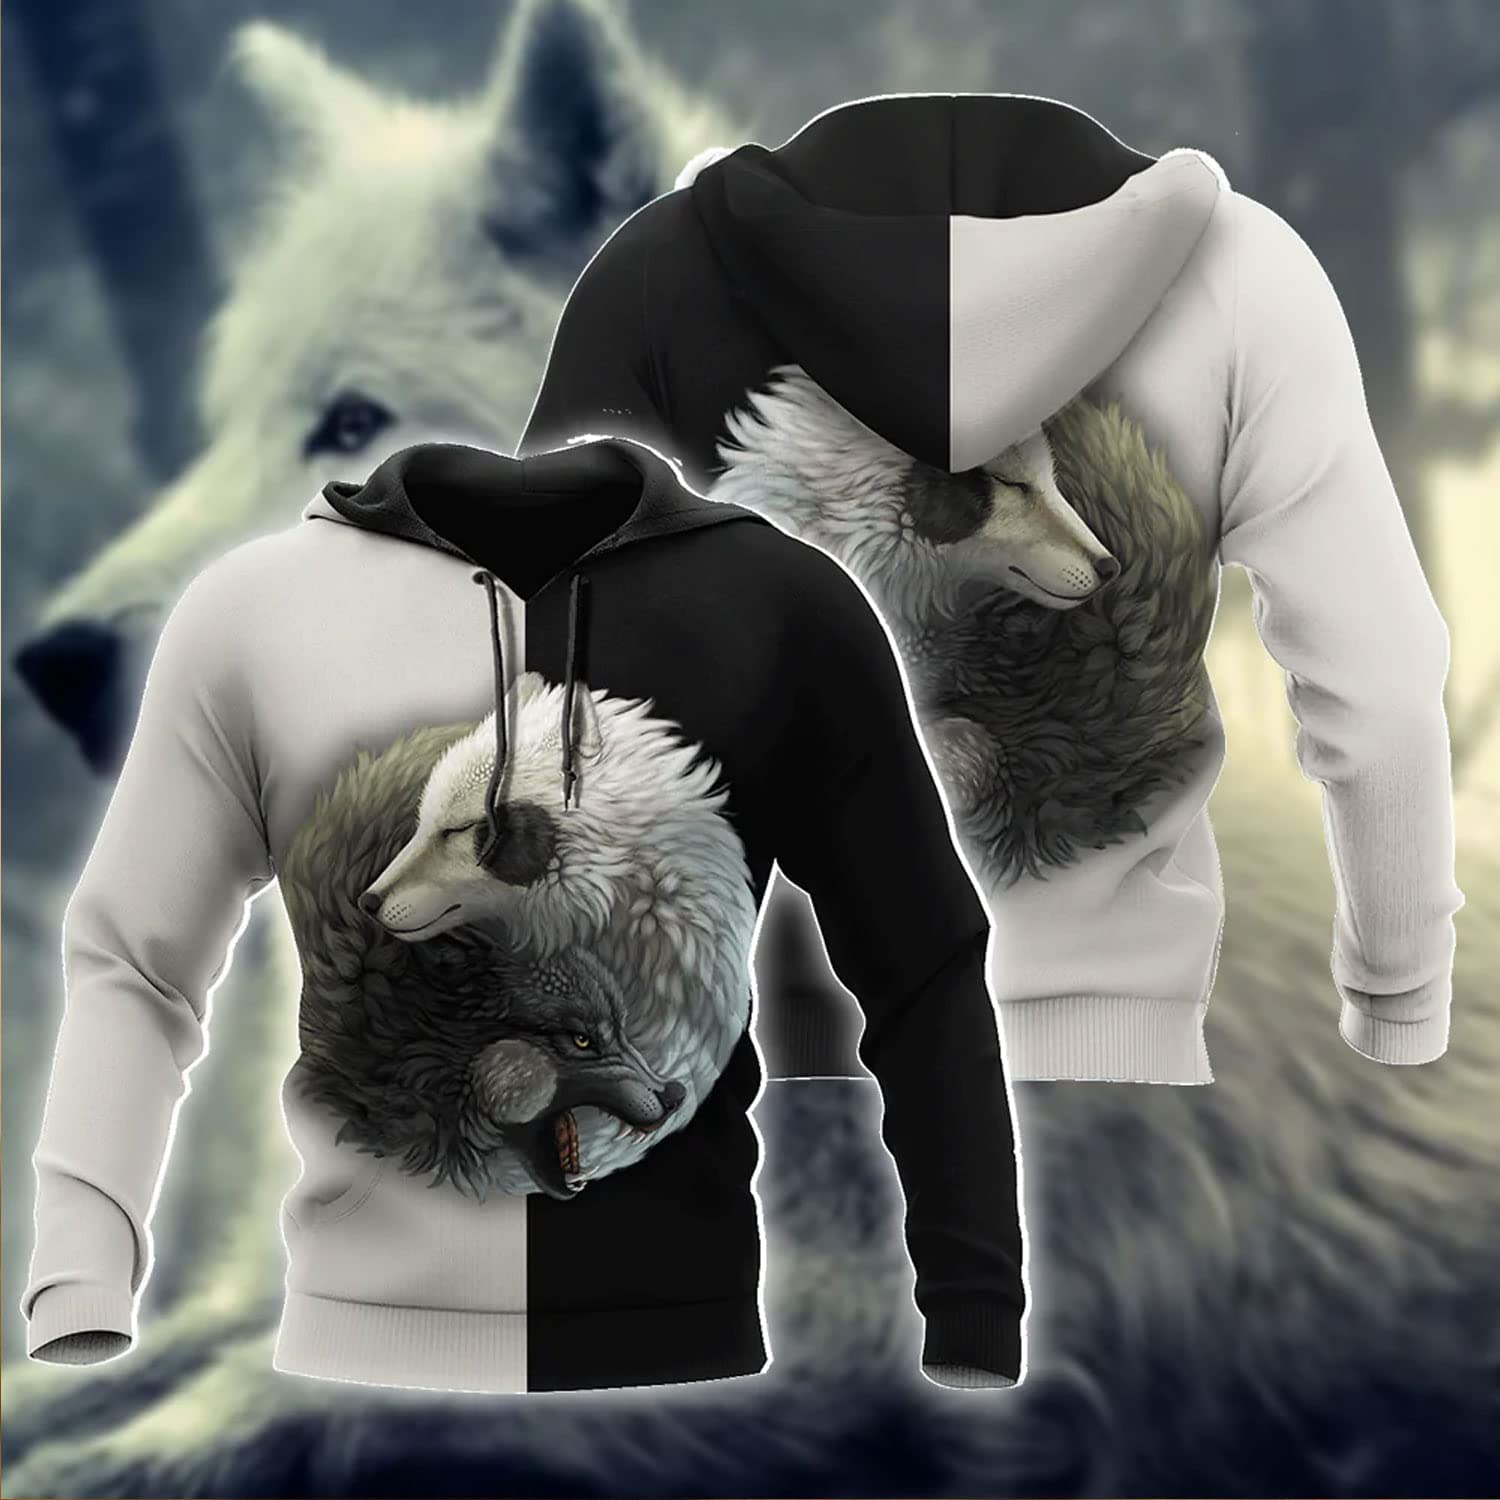 Wolf Yin & Yang 3D Hoodie with All-Over Print, Perfect for Winter and Wolf Lovers, Ideal Gift for Hunting Enthusiasts and Family, Available in Pullover Hoodie, Hawaiian Shirt, and Sweatshirt Variants. – JOT1499